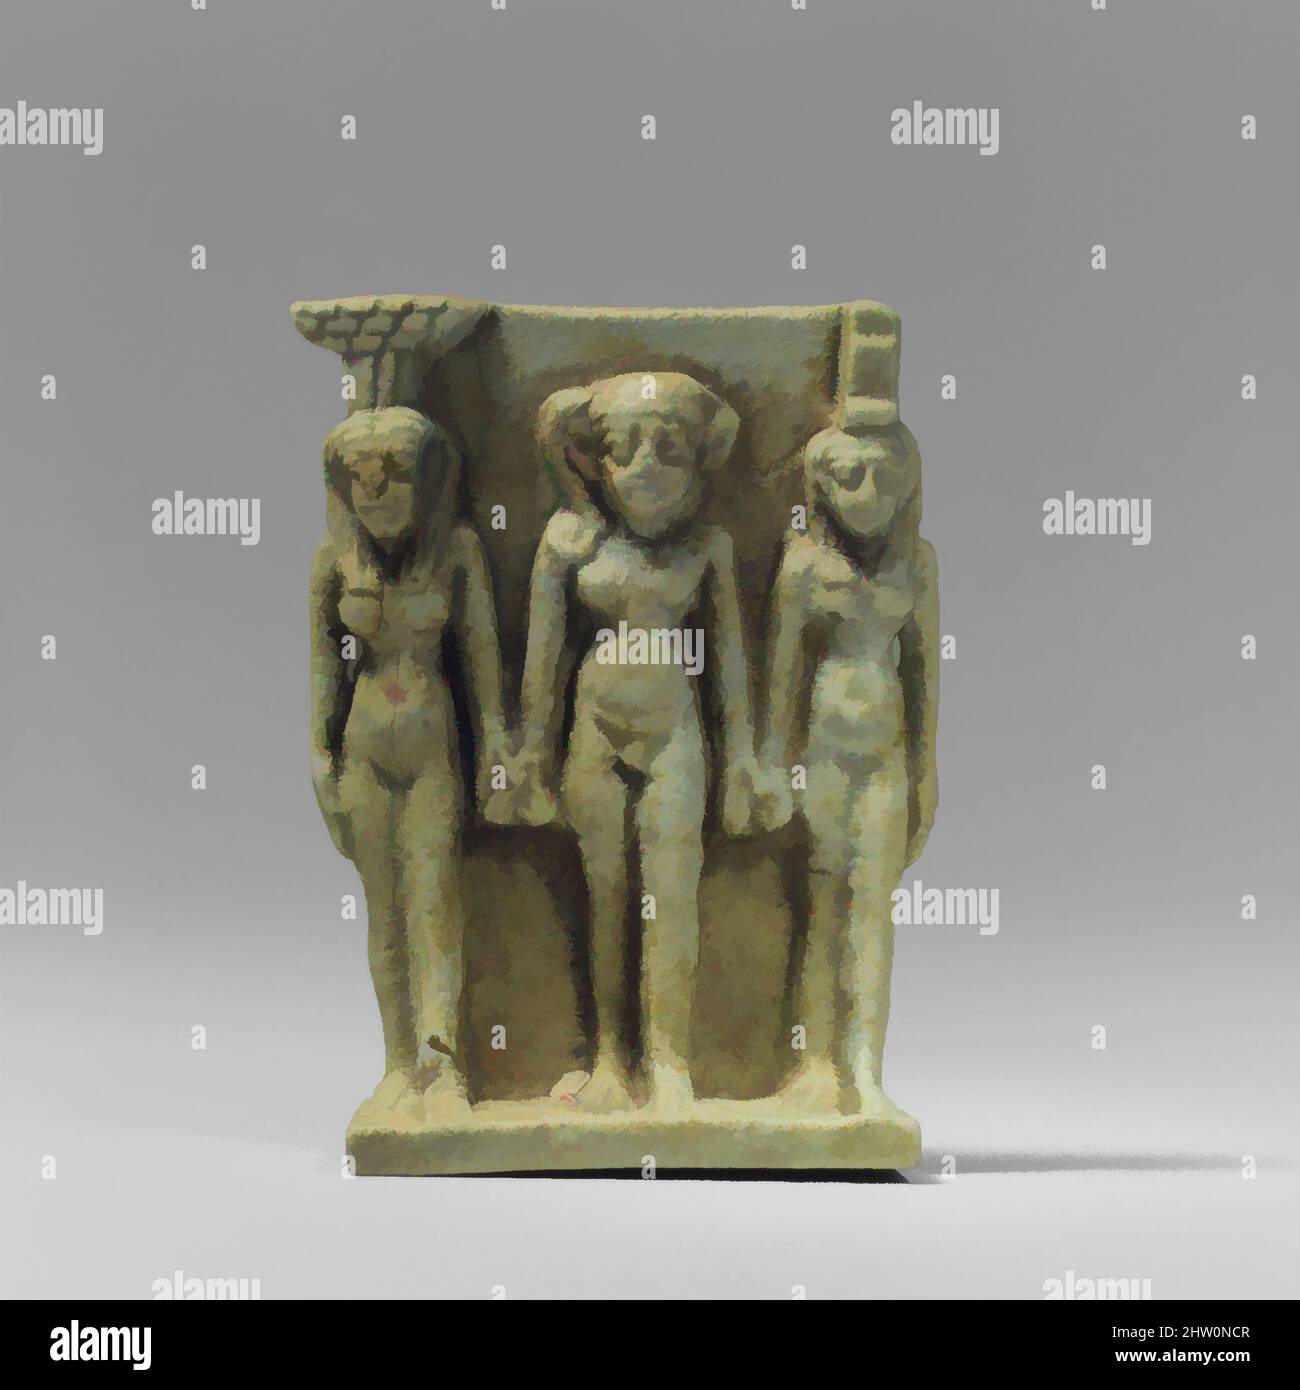 Art inspired by Nephthys, Horus, and Isis Amulet, Late Period, Saite, Dynasty 26, 664–525 B.C., From Egypt, Faience, H. 4.0 cm (1 9/16 in), These three deities make up the Osirian triad from the great myth in Egyptian funerary religion. Horus, the young boy in the center, was the son, Classic works modernized by Artotop with a splash of modernity. Shapes, color and value, eye-catching visual impact on art. Emotions through freedom of artworks in a contemporary way. A timeless message pursuing a wildly creative new direction. Artists turning to the digital medium and creating the Artotop NFT Stock Photo